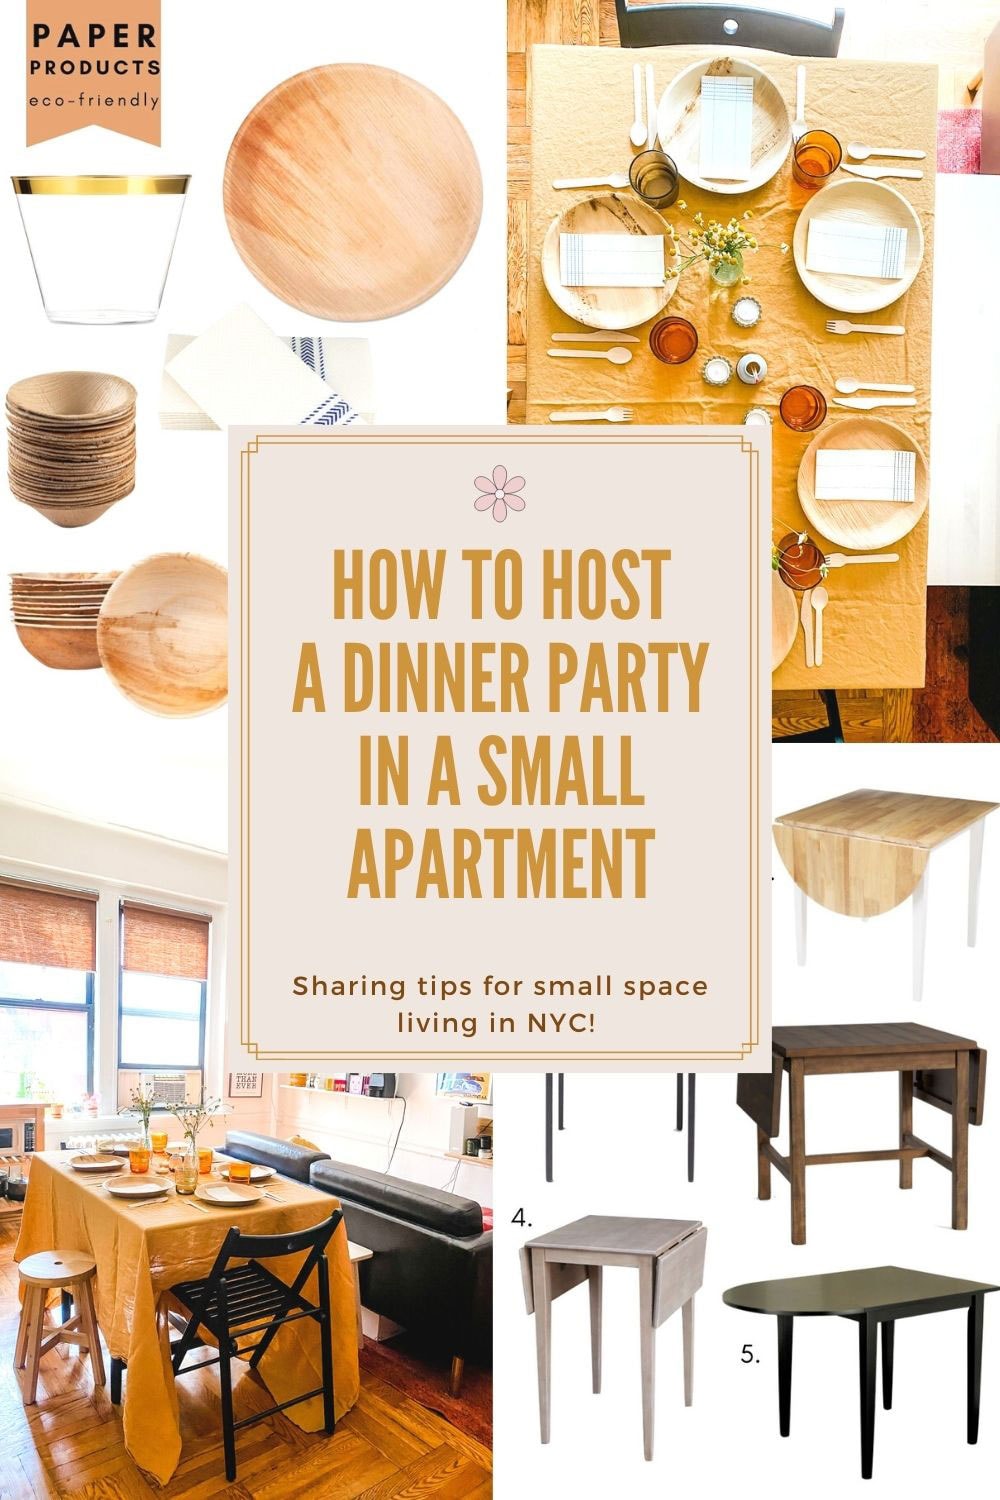 How to Host a Lavish Brunch in a Small Apartment